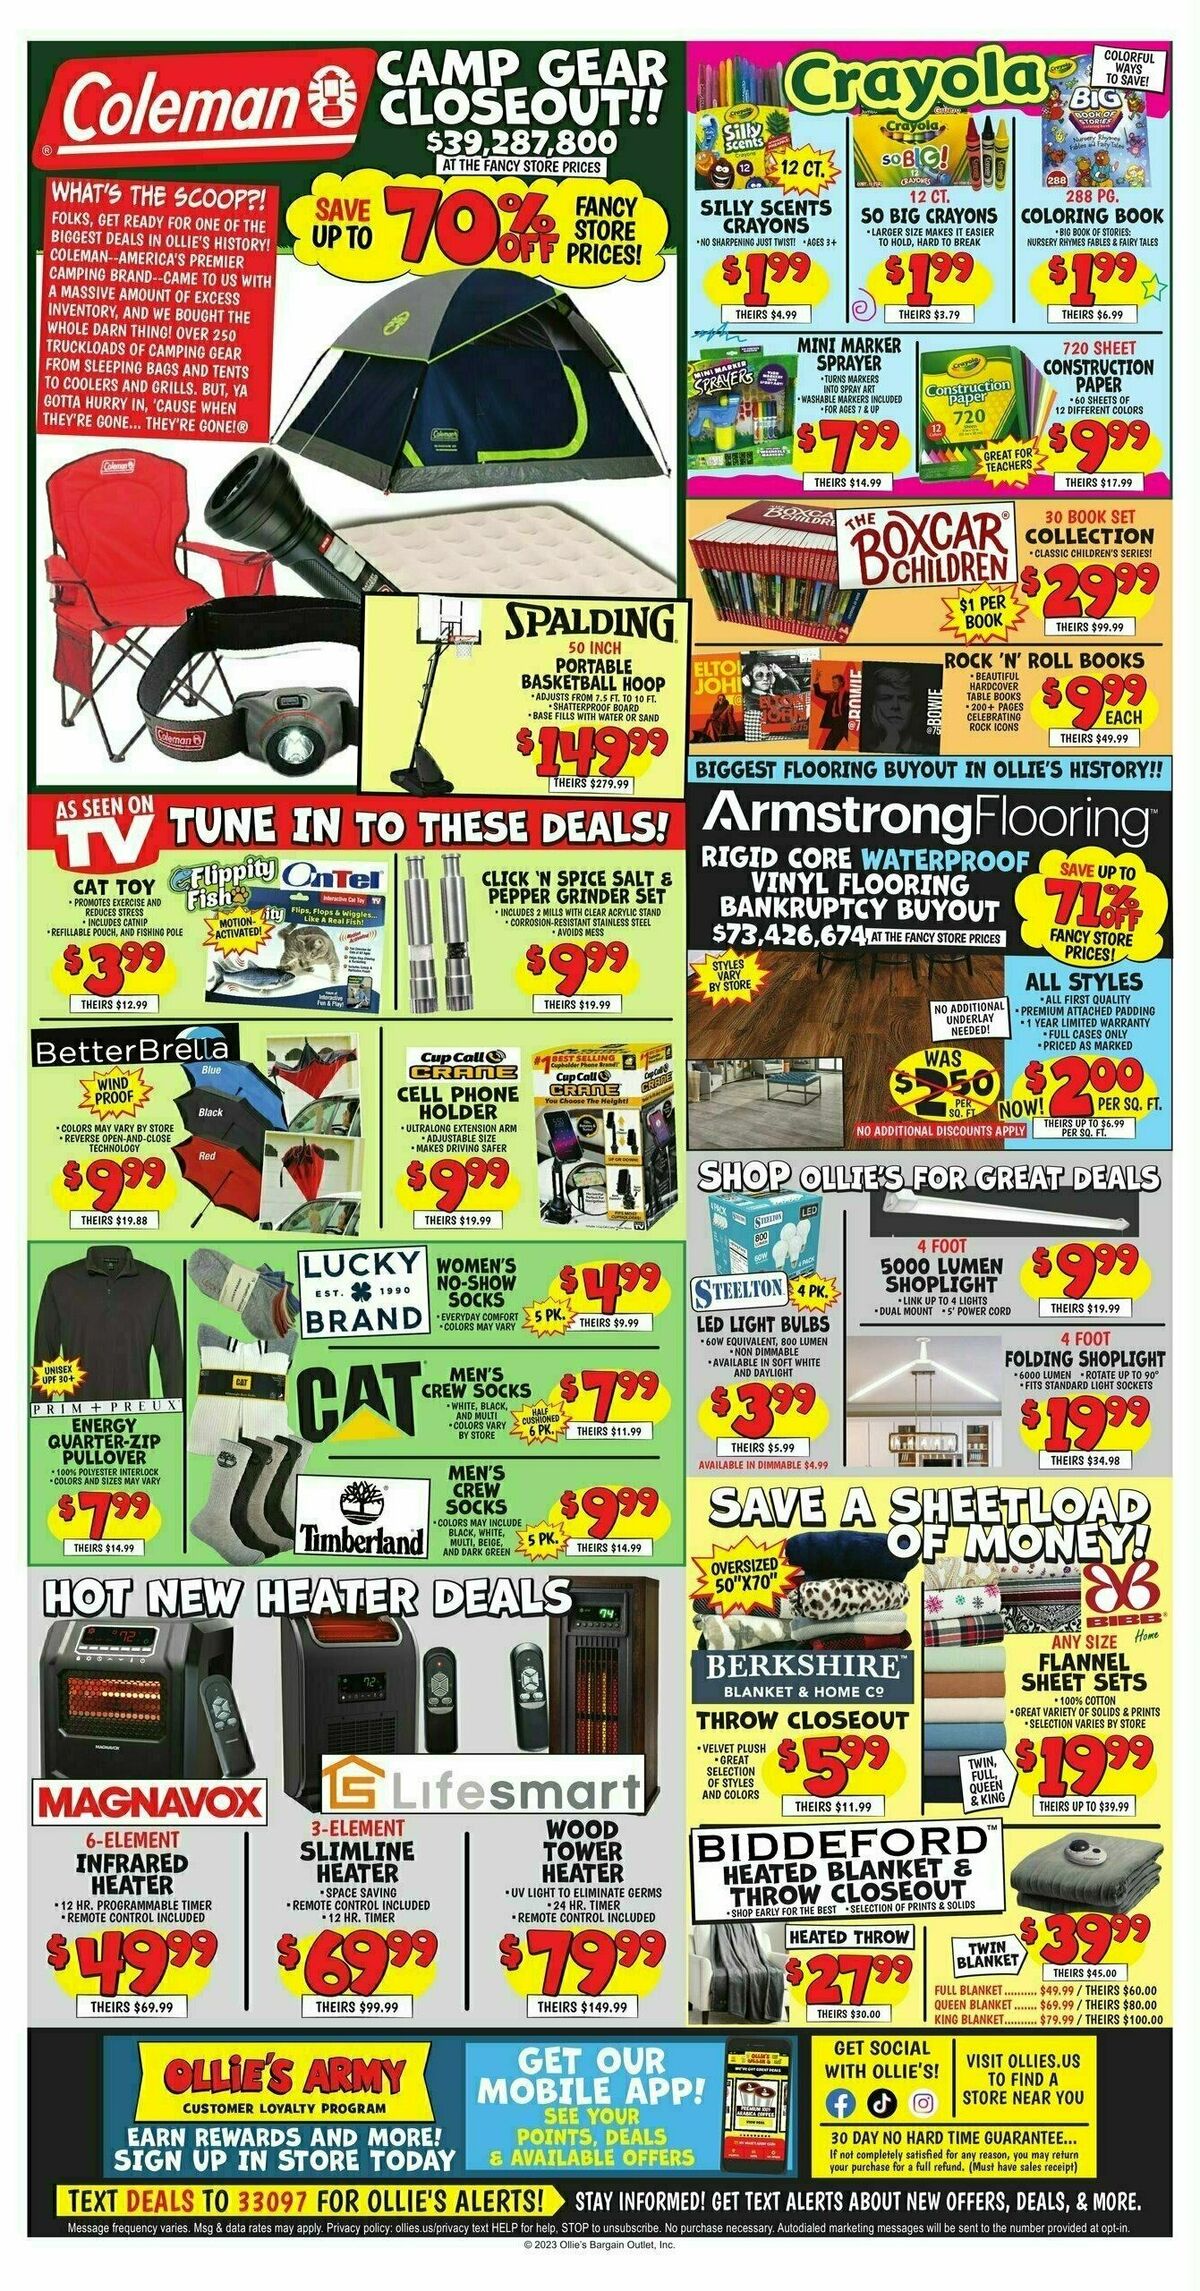 Ollie's Bargain Outlet Weekly Ad from September 27